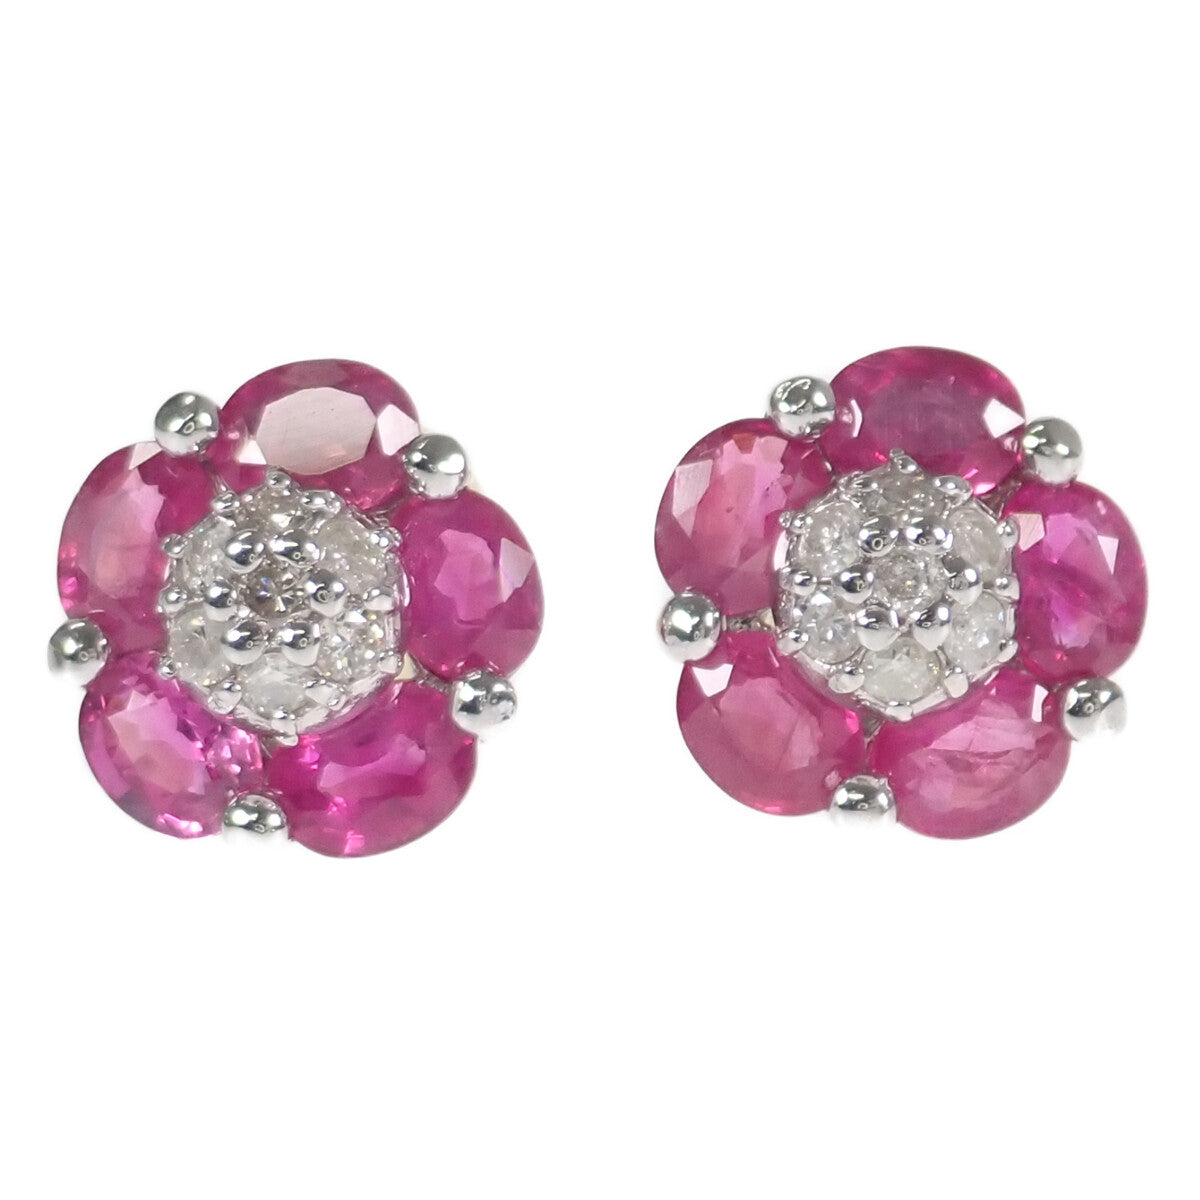 [LuxUness]  Women's 1.06ct Ruby and 0.10ct Diamond Floral Design Earrings in K18 White Gold, Pink, Pre-owned in Excellent condition